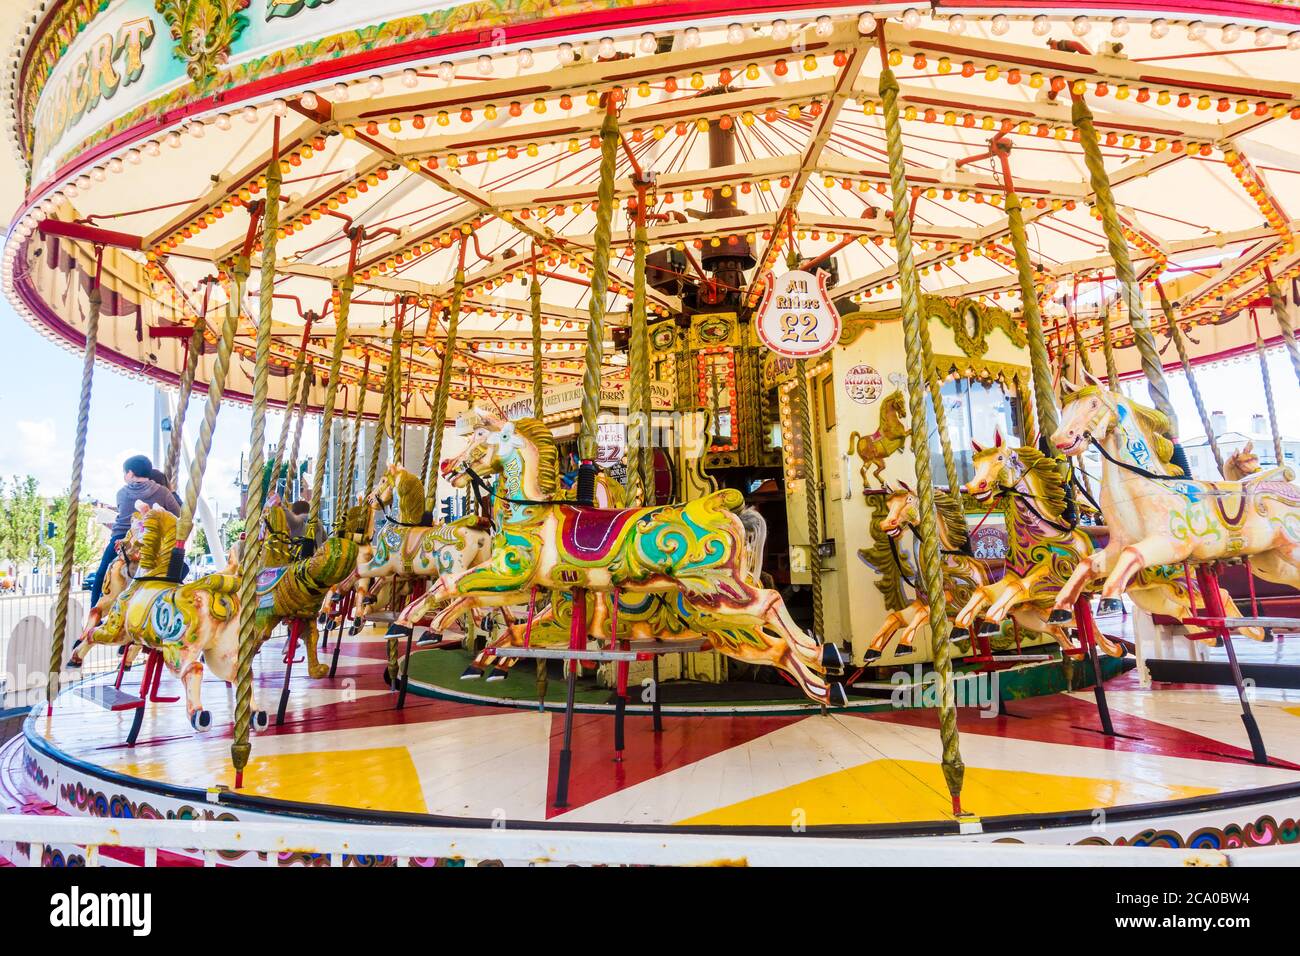 SOUTHPORT UNITED KINGDOM, 30 JUNE 2019 Horses on a golden gallopers ride at a traditional fairground Stock Photo